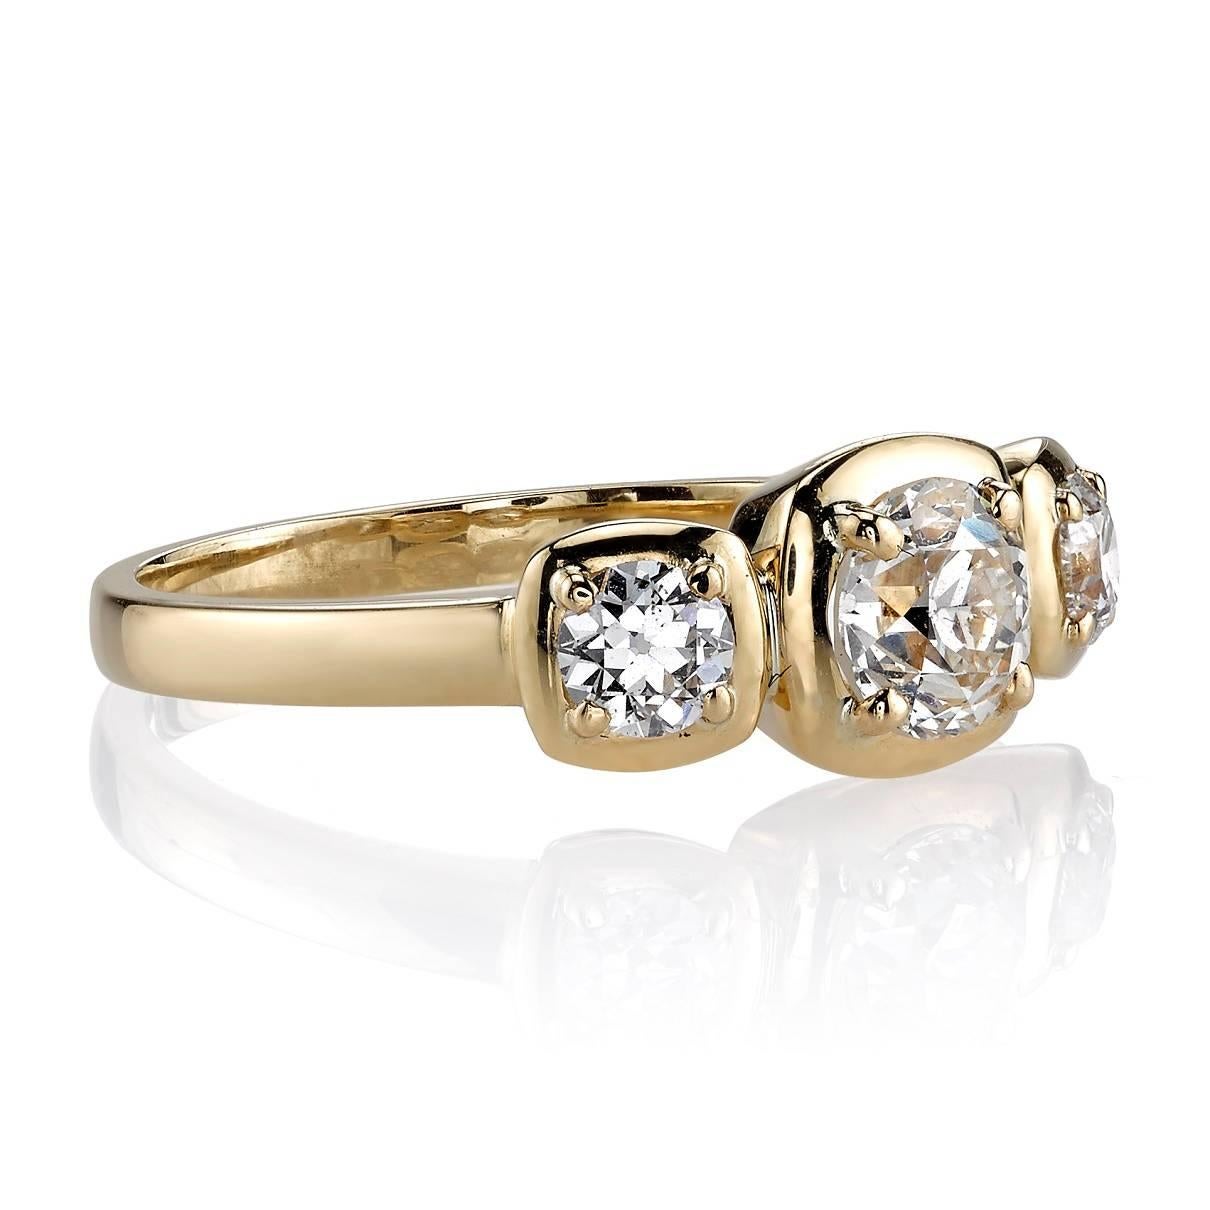 0.69ct J/VS1 EGL certified old European cut diamond with 0.36ctw old European cut side diamonds set in a handcrafted 18k yellow gold three stone ring.